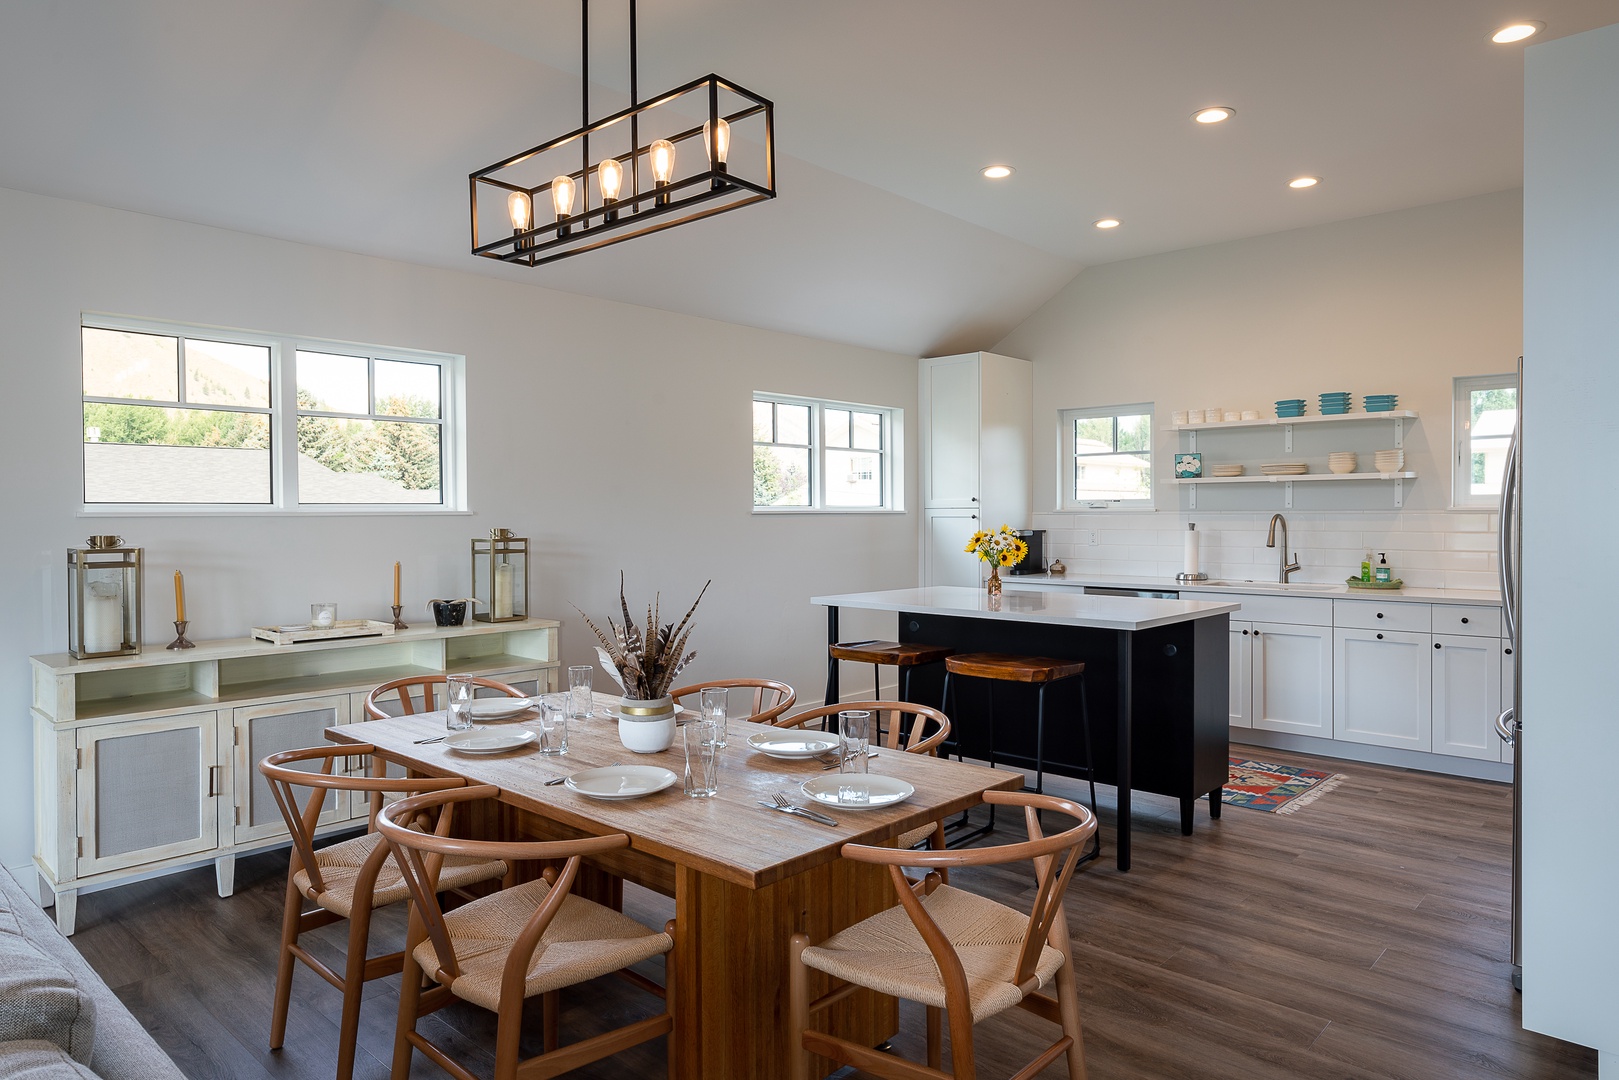 Hailey Vacation Rentals, Contemporary Red Feather Comfort - The dining table comfortably seats 6 and can accommodate 2 more people at the breakfast bar